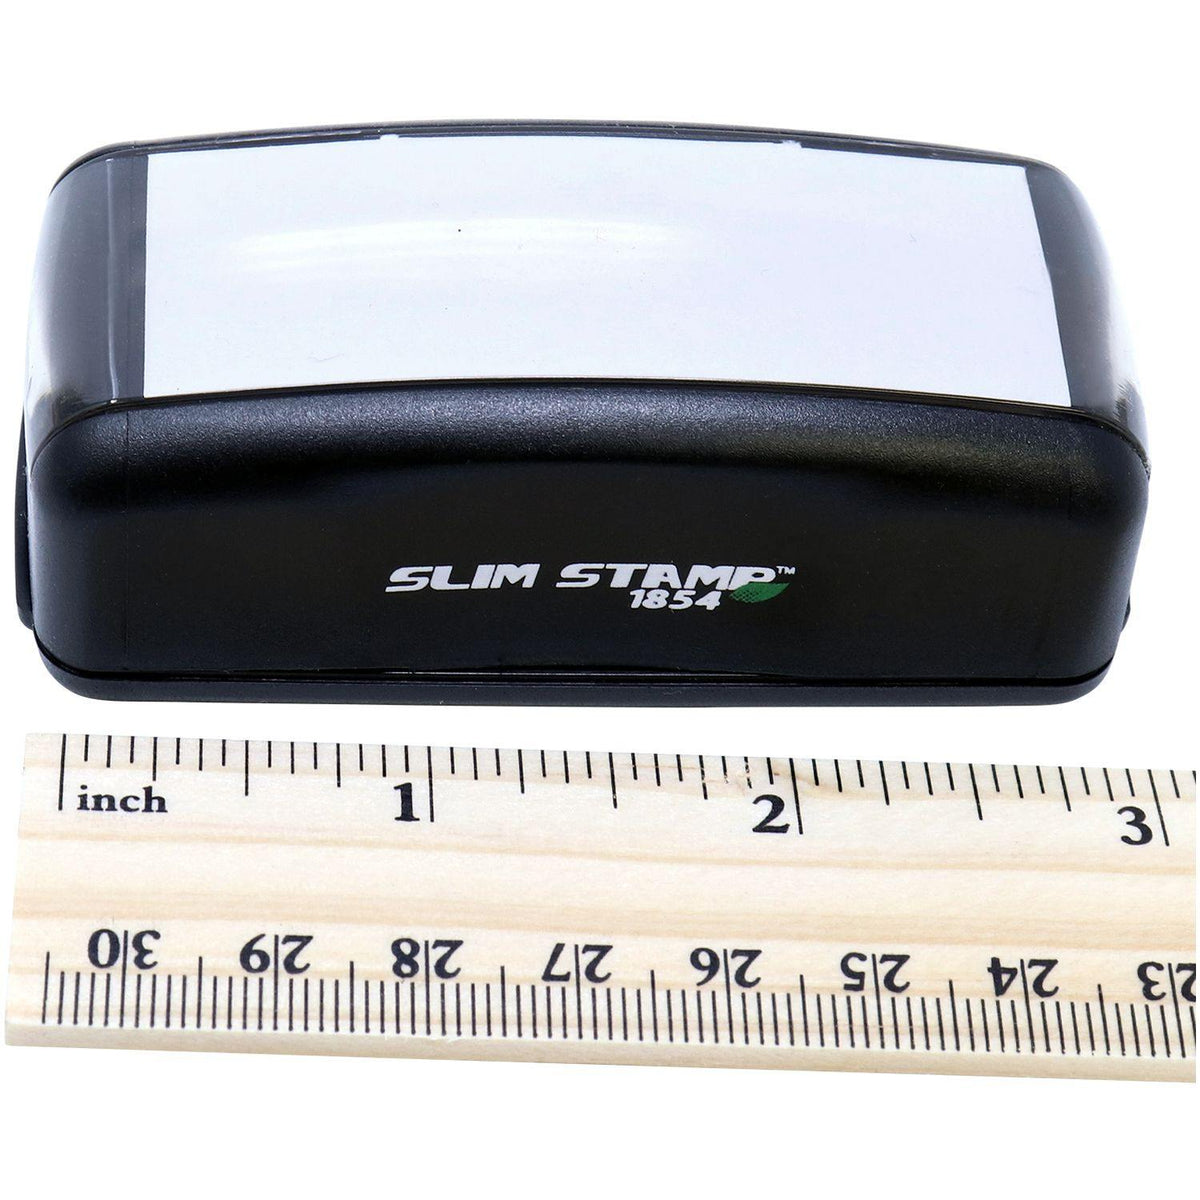 Measurement Large Pre Inked Ppo Stamp with Ruler